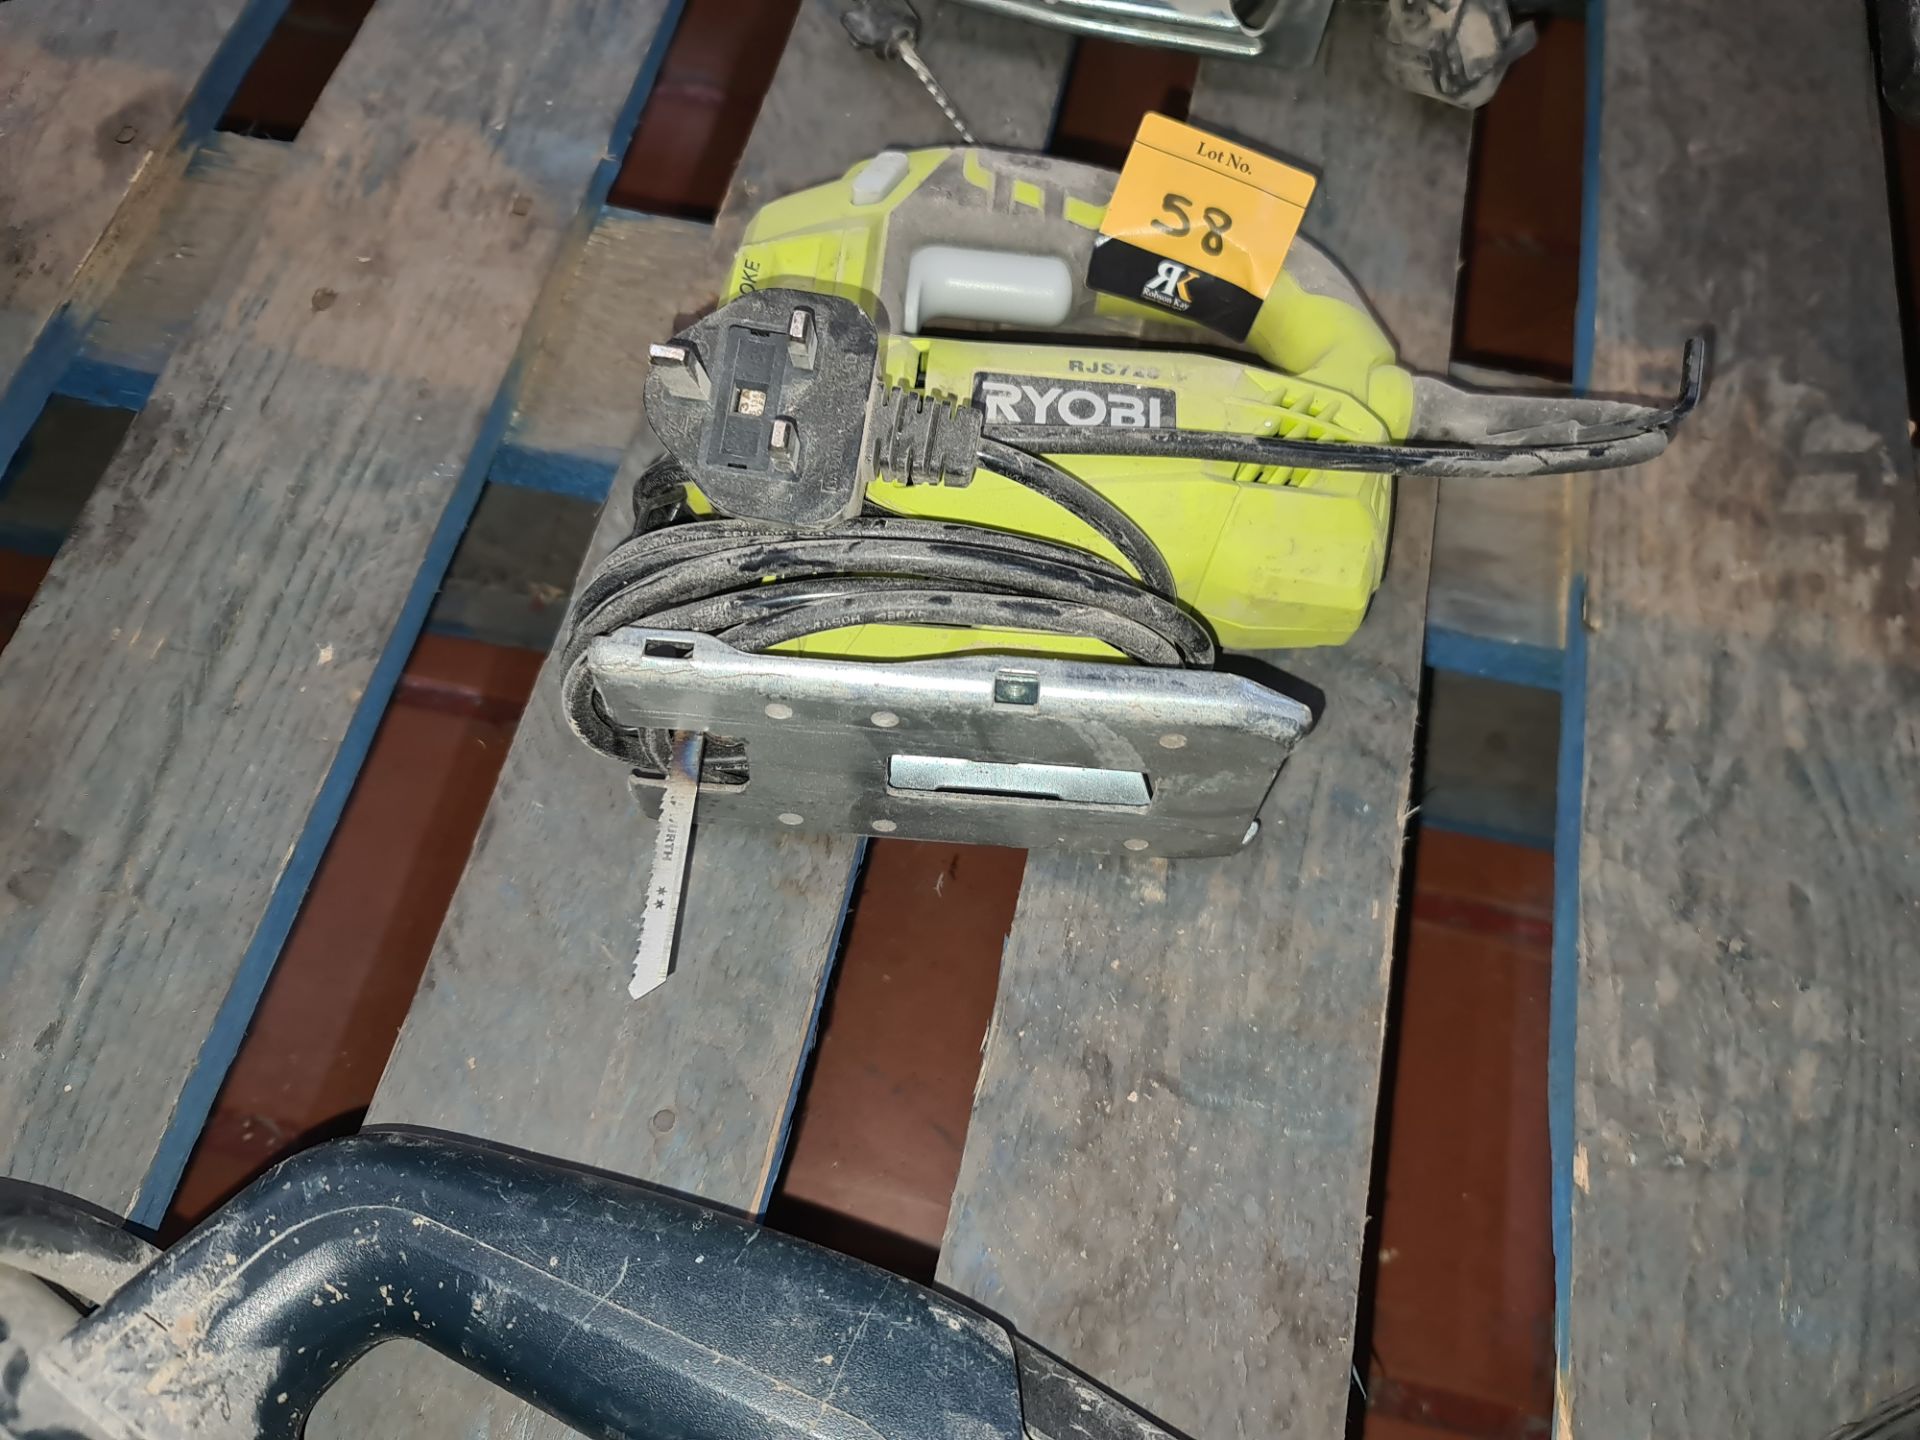 Ryobi model RJS720 electric jig saw plus second Ryobi jig saw which appears possibly incomplete - Image 2 of 5